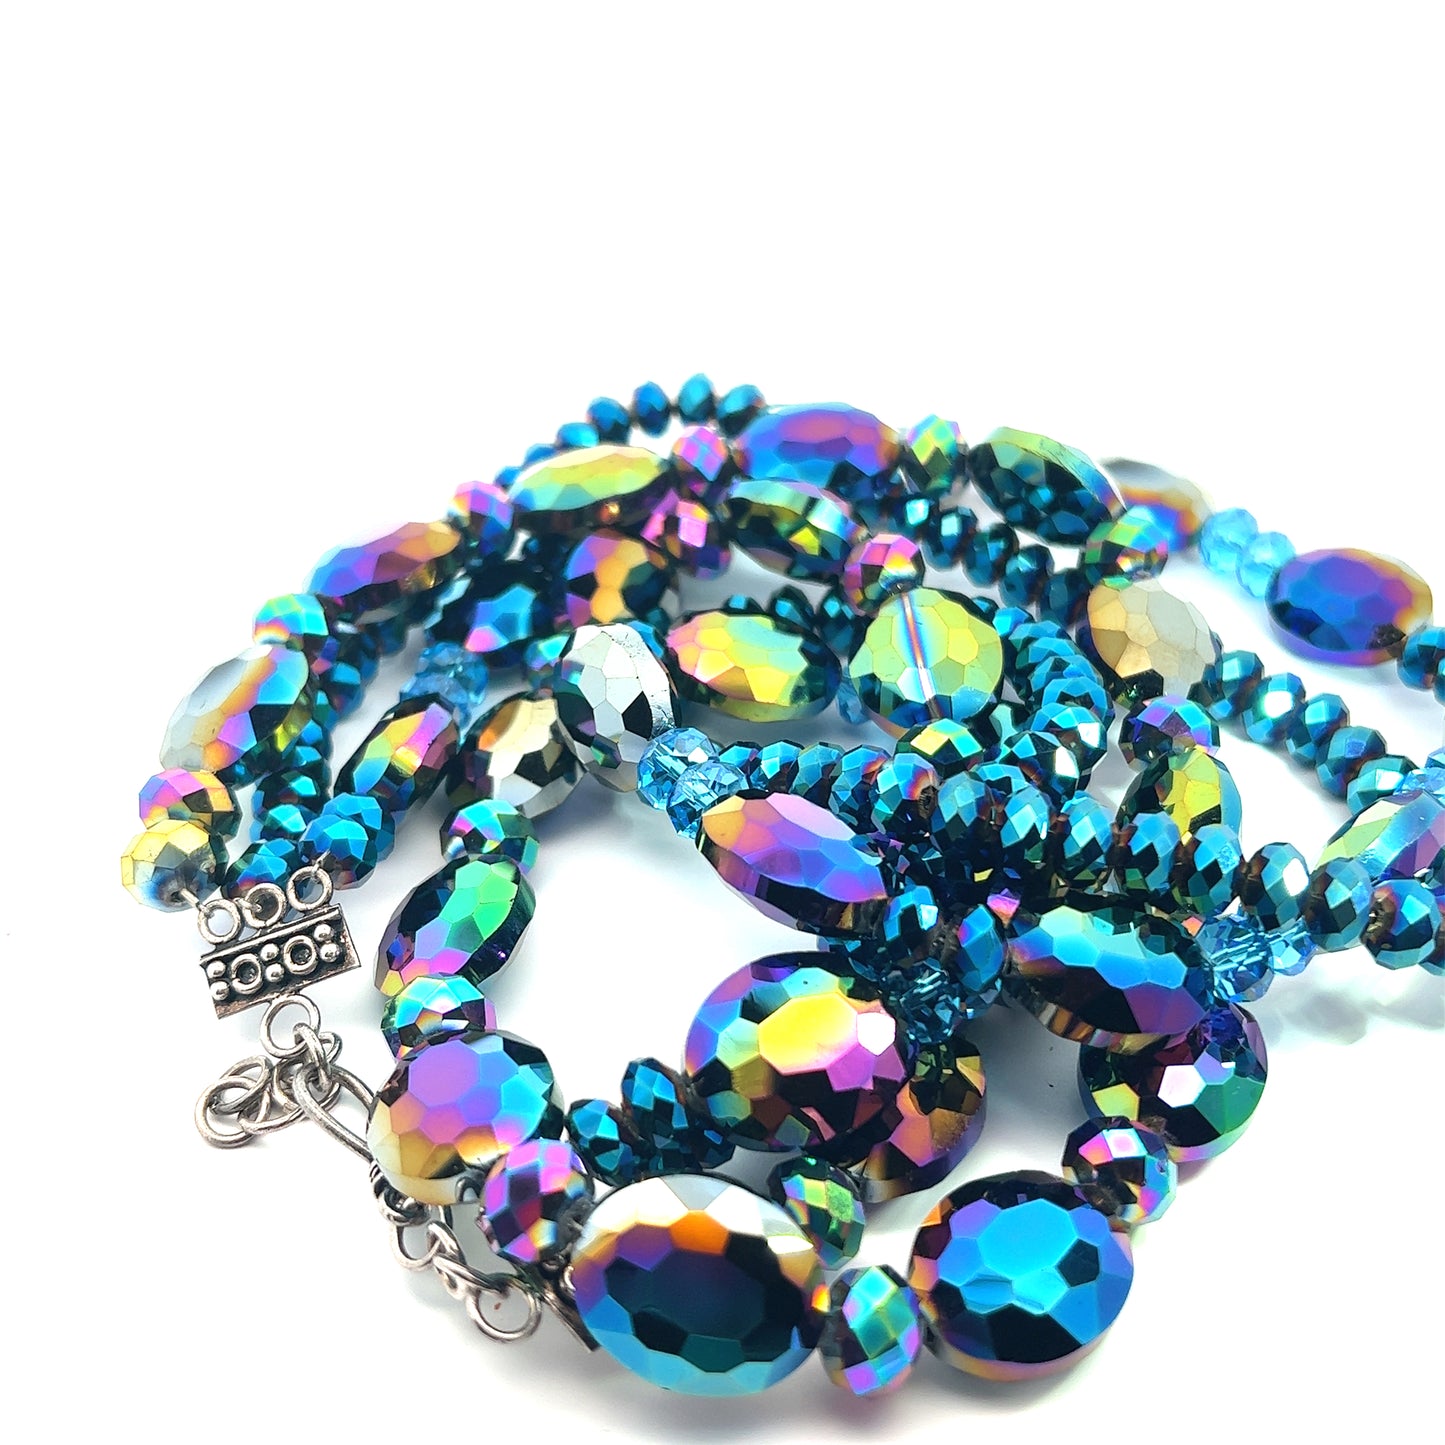 Iridescent Blue and Purple Statement Necklace - Born To Glam